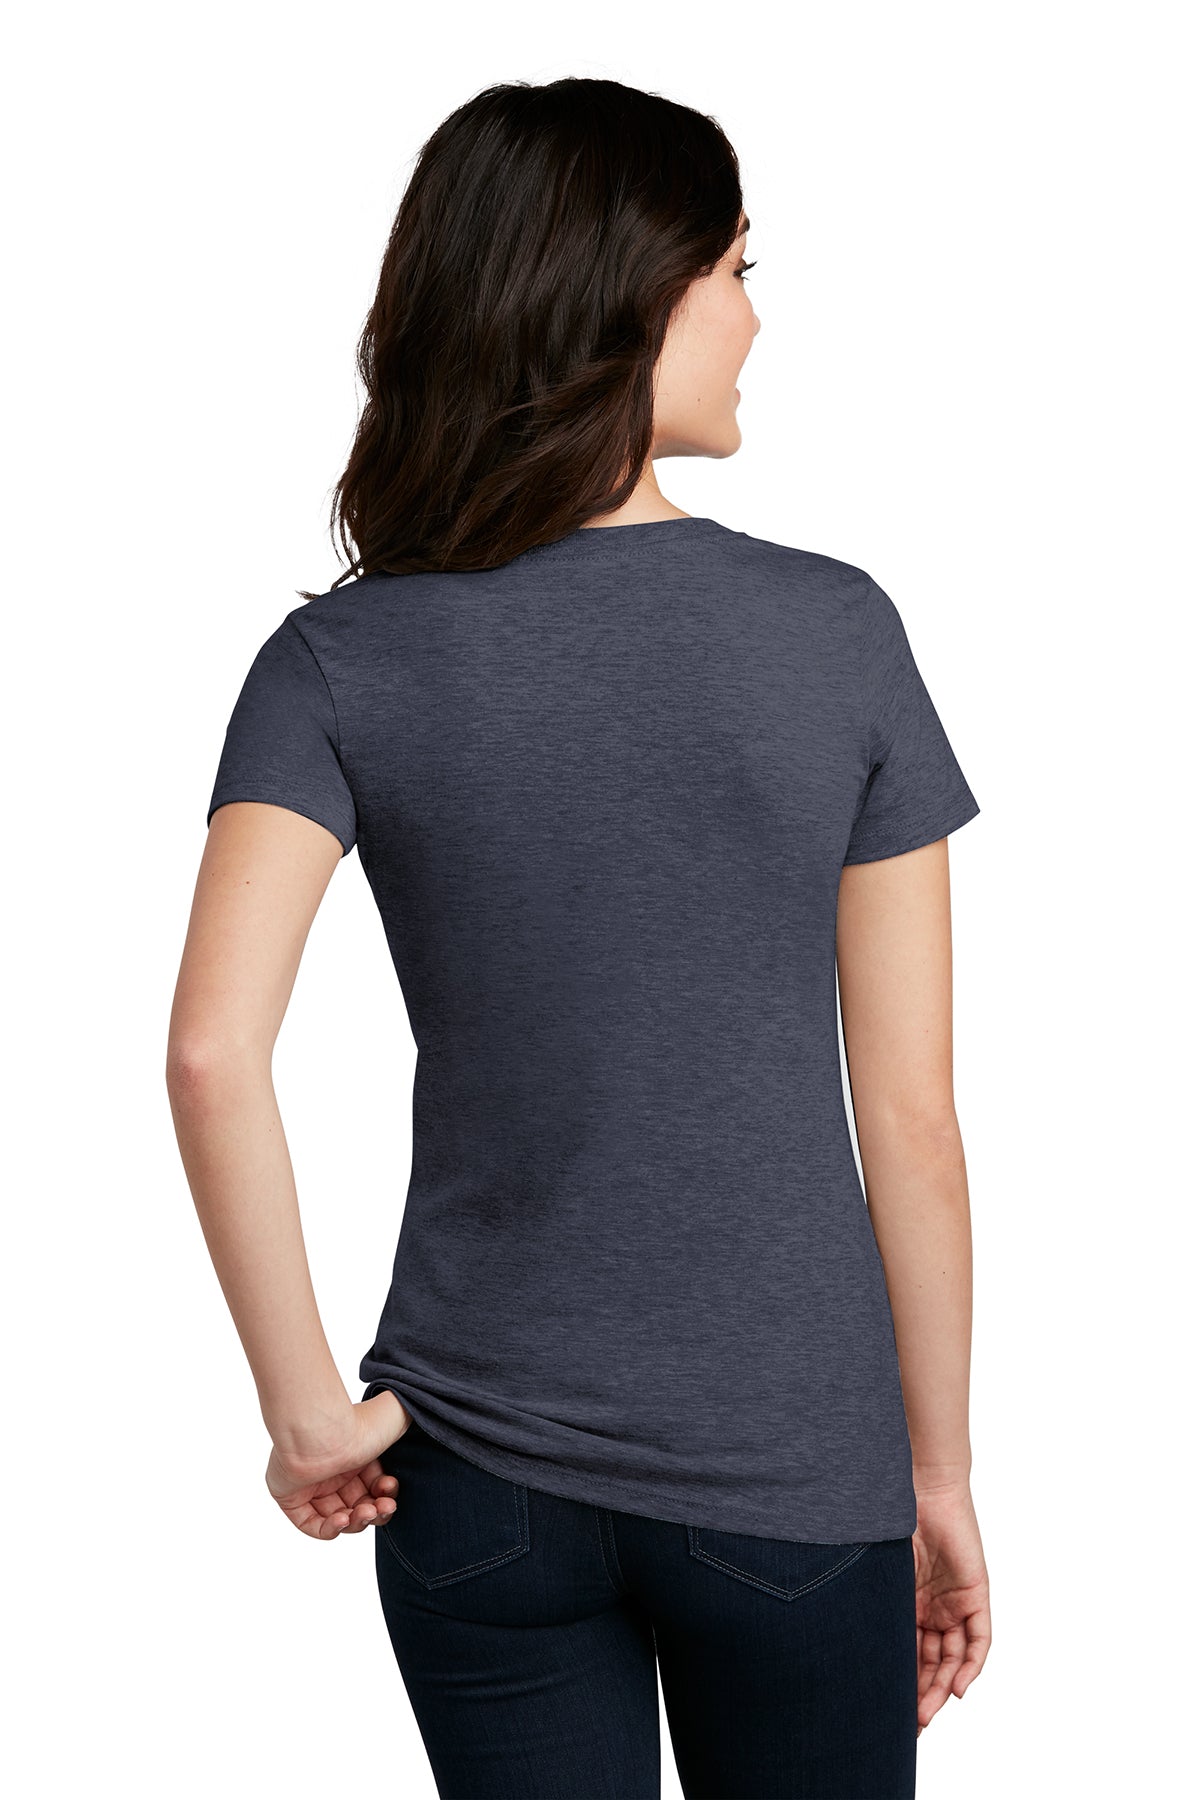 District Made Ladies Perfect Blend V-Necks, Heathered Navy